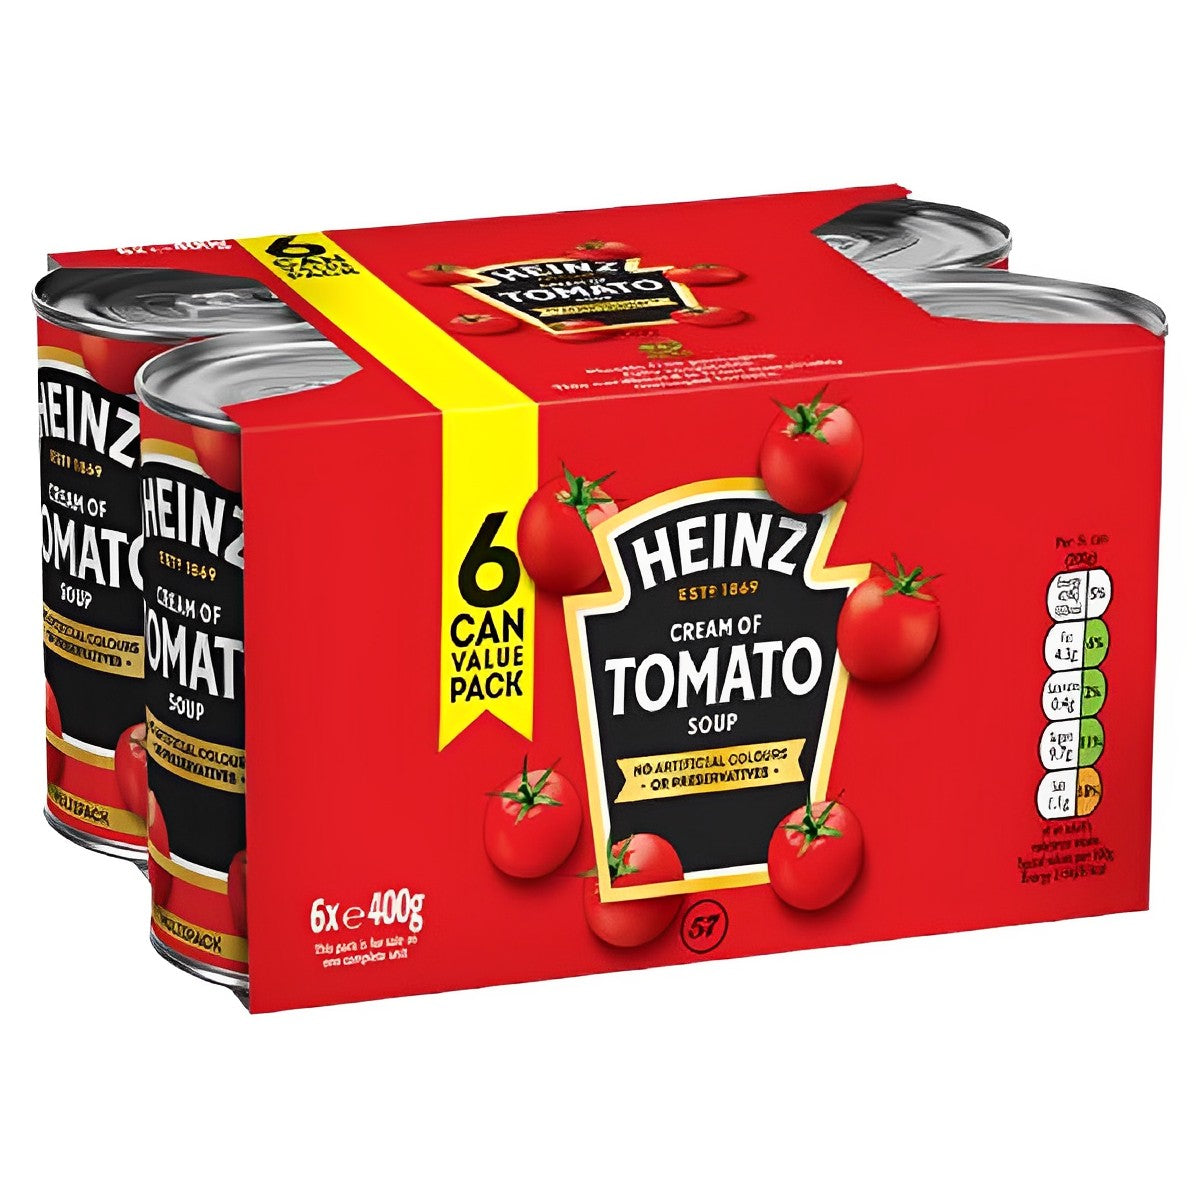 Heinz - Cream of Tomato Soup - 6 x 400g - Continental Food Store